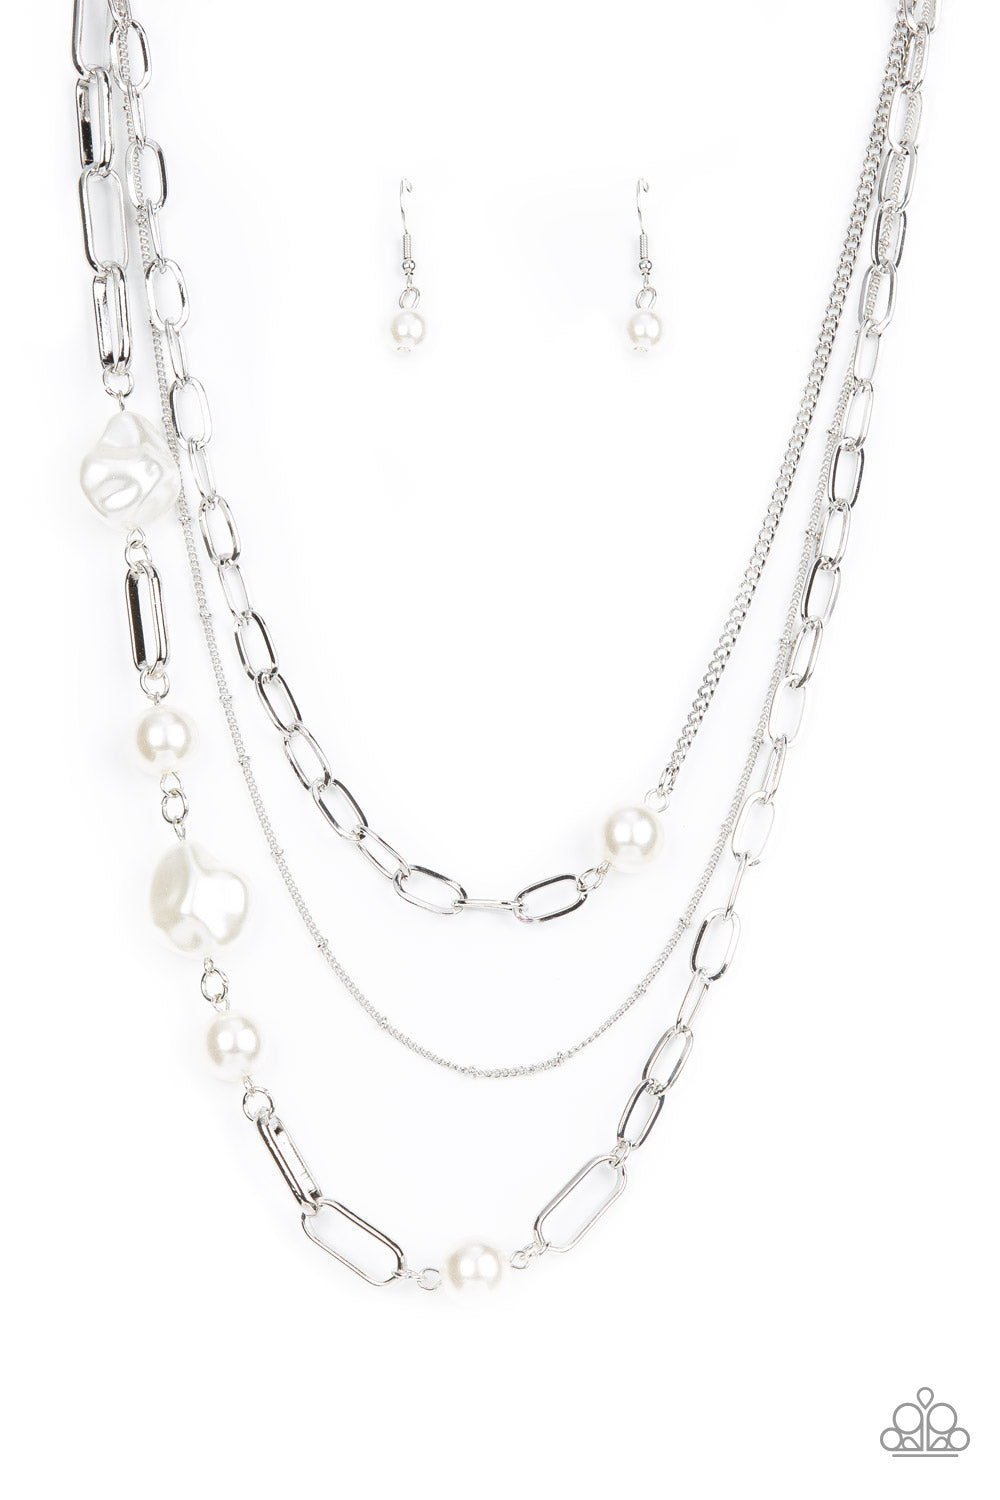 Modern Innovation - White Pearl and Silver Necklace - Paparazzi Accessories - Bejeweled Accessories By Kristie - Round and imperfectly faceted white pearls adorn an assortment of mismatched chunky and dainty silver chains, for an edgy refinement below the collar. Fashion necklace has an adjustable clasp closure.